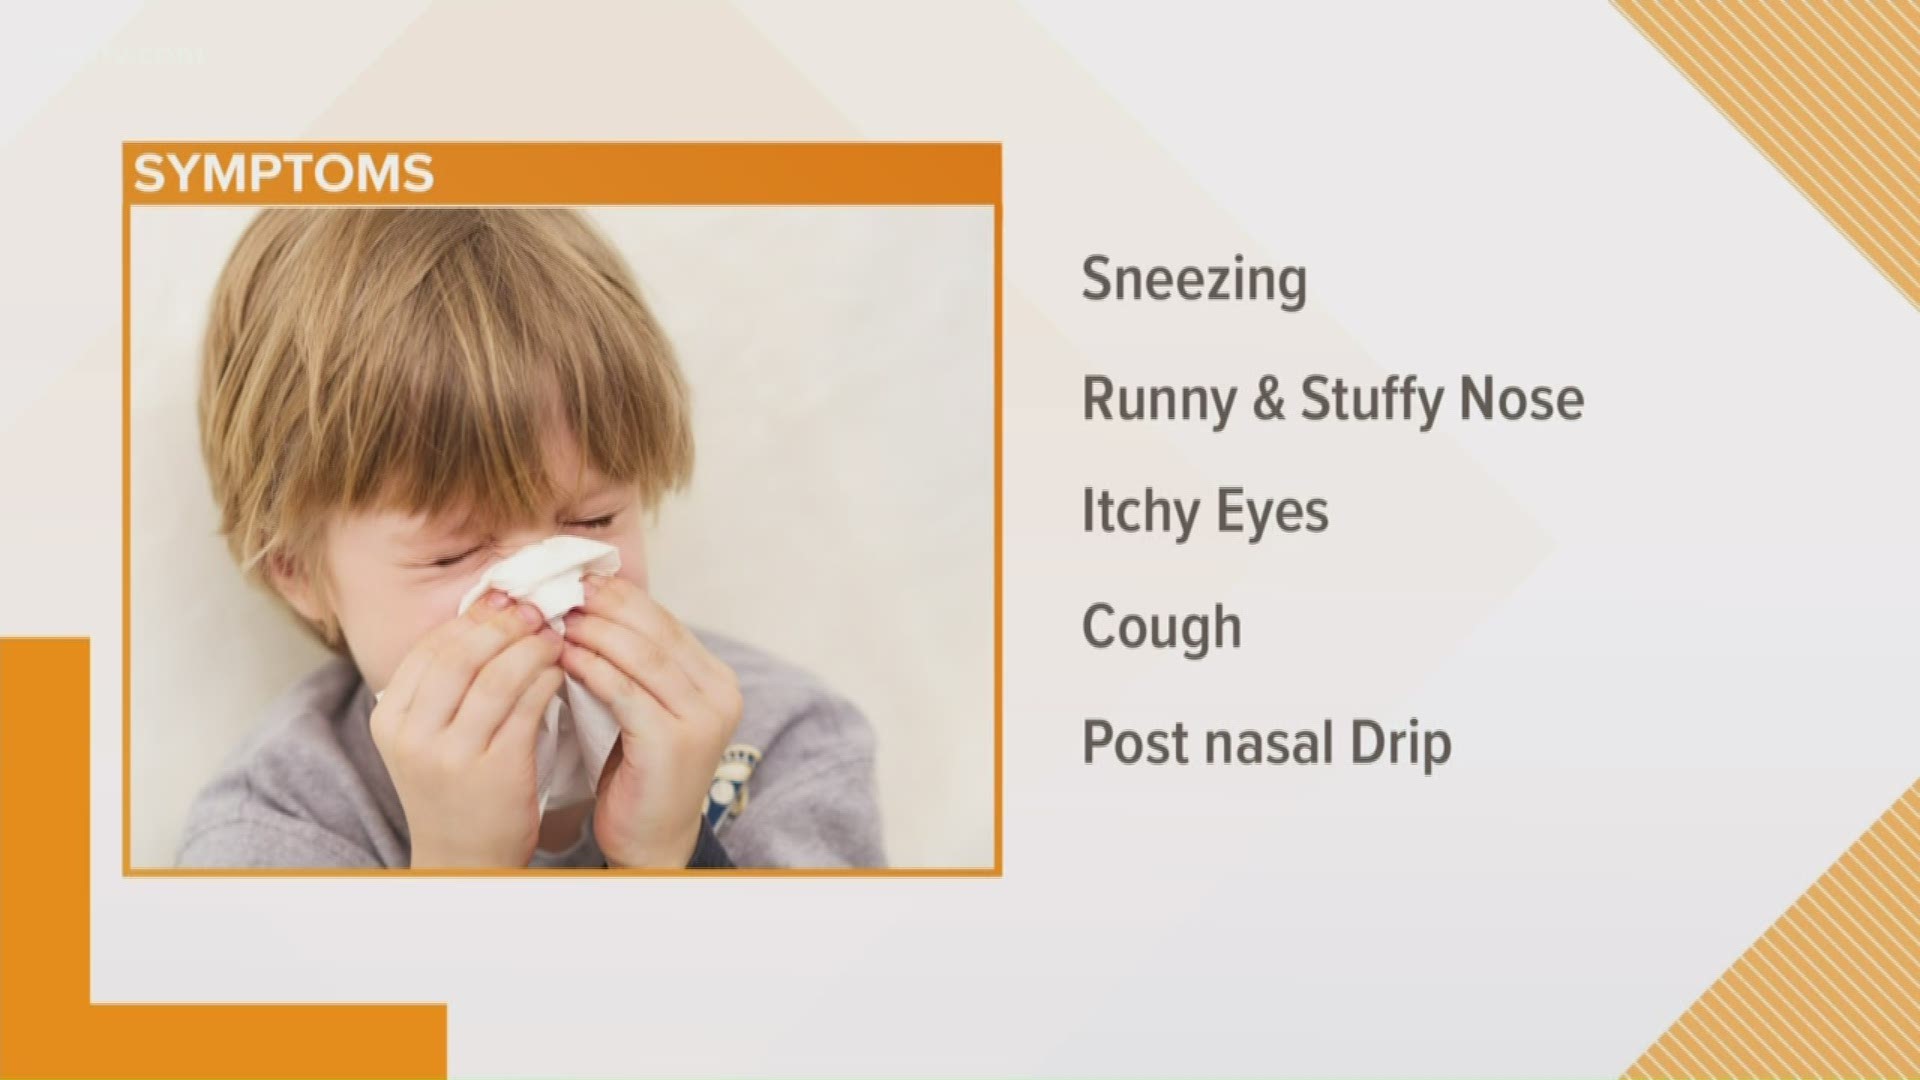 Pediatrician Michael Wasserman has the signs and symptoms to look for in your child this allergy season and what parents can do to help.